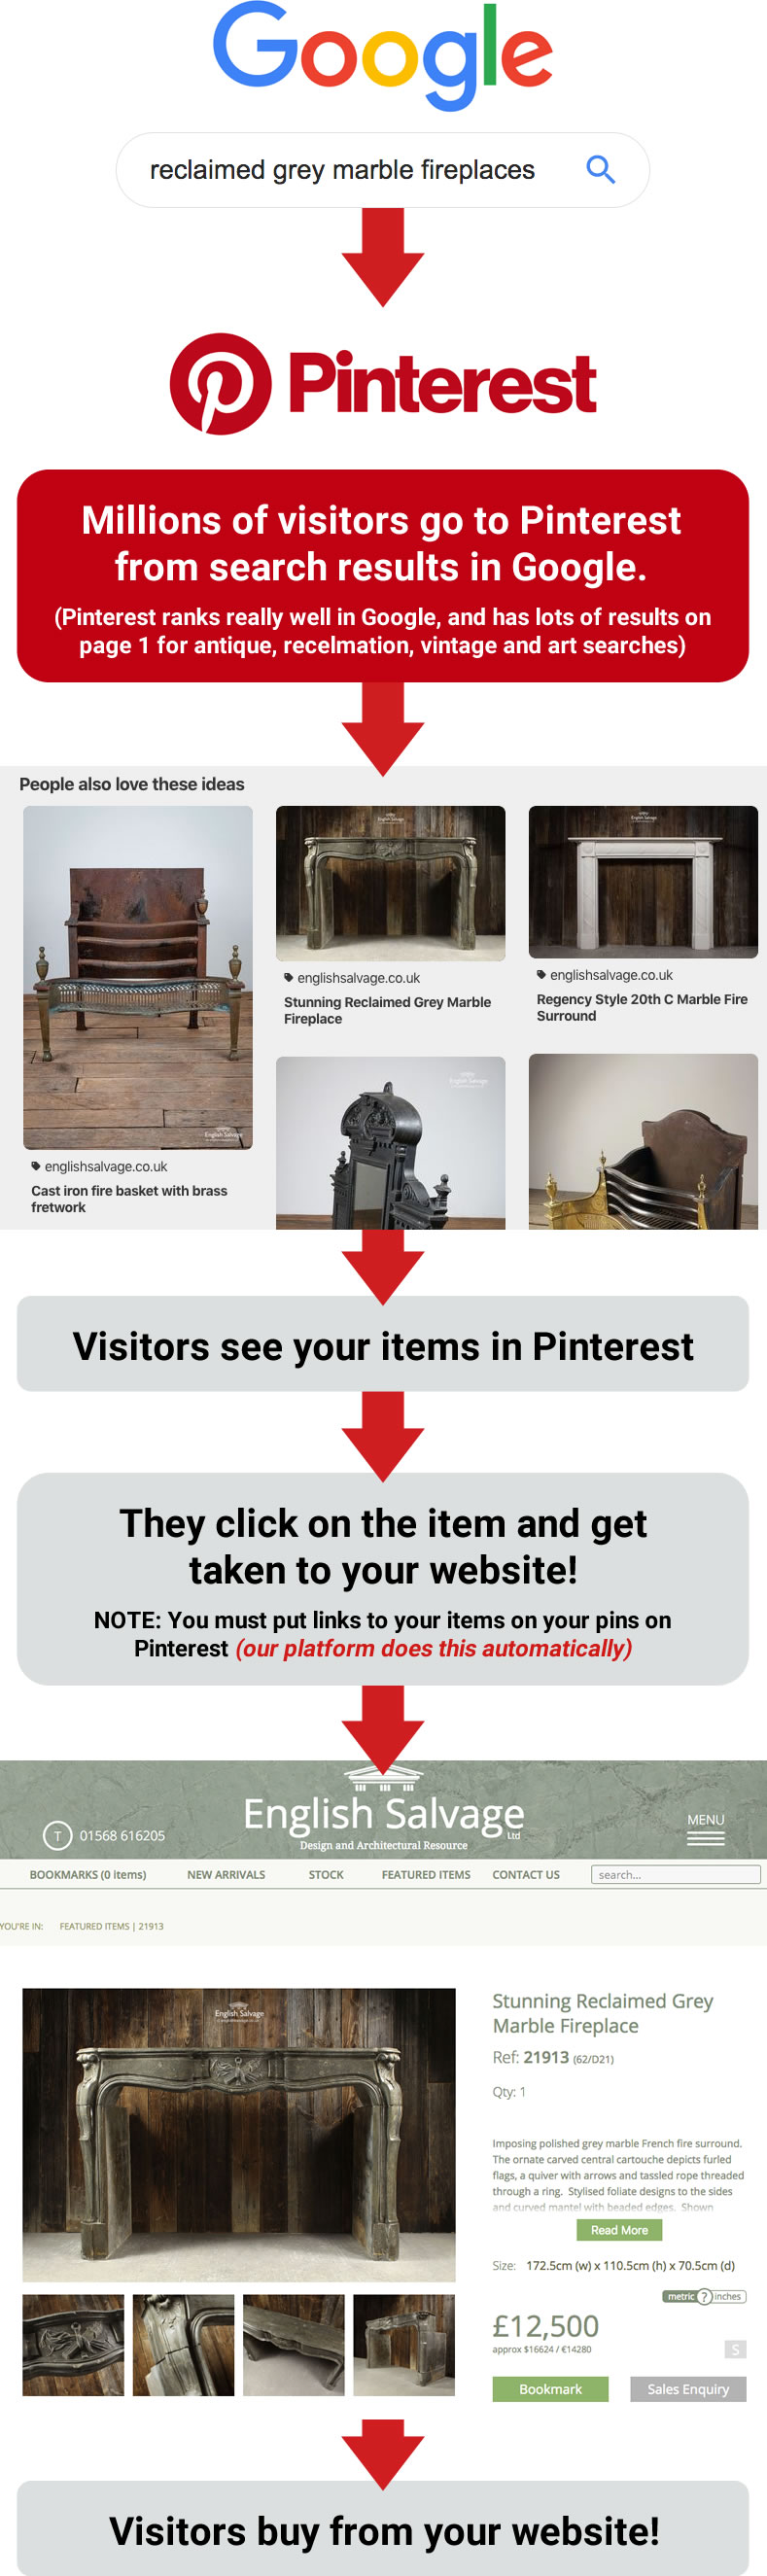 Getting visitors via Pinterest from Google